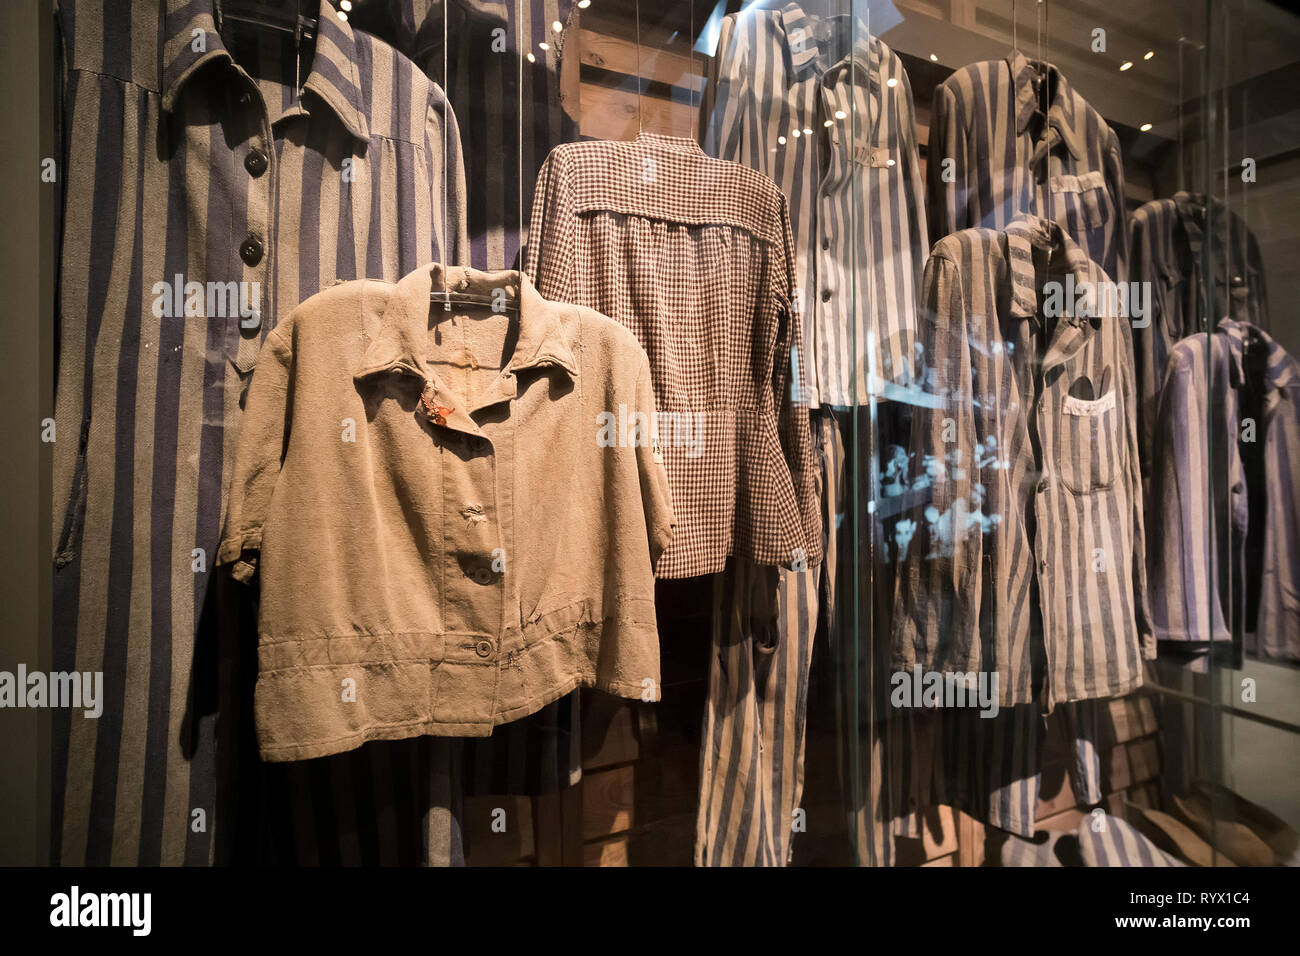 View of Yad Vashem exposition of clothes worn by jewish prisoners in concentration and labour camps. Imprisonment of Jews during WWII. JERUSALEM, ISRA Stock Photo